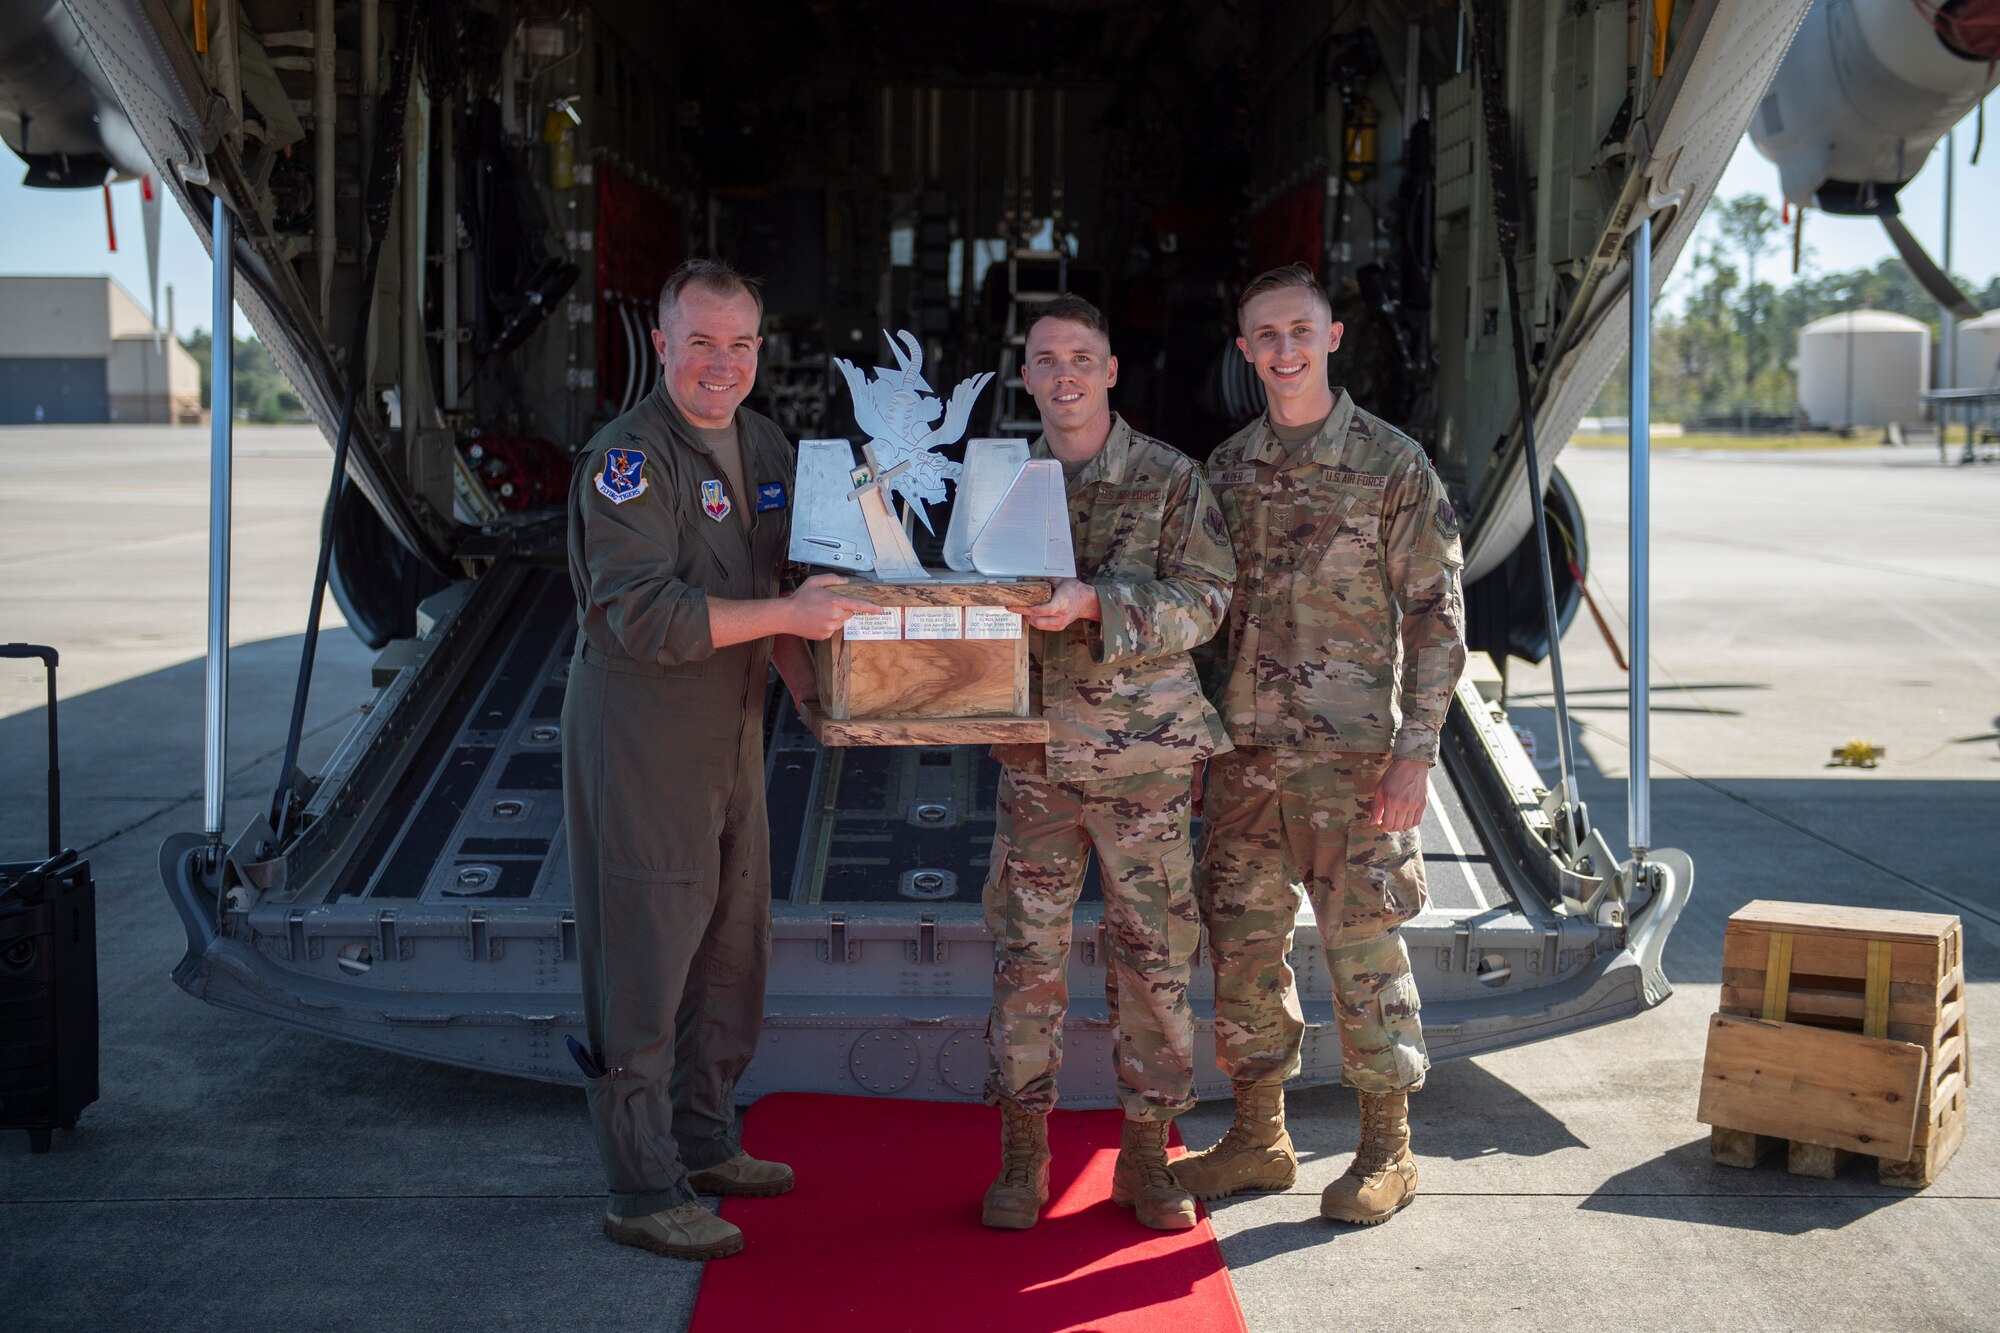 A photo of three people holding a big metal trophy. They are standing on a red carpet laid out behind an HC-130J with its door down/open.